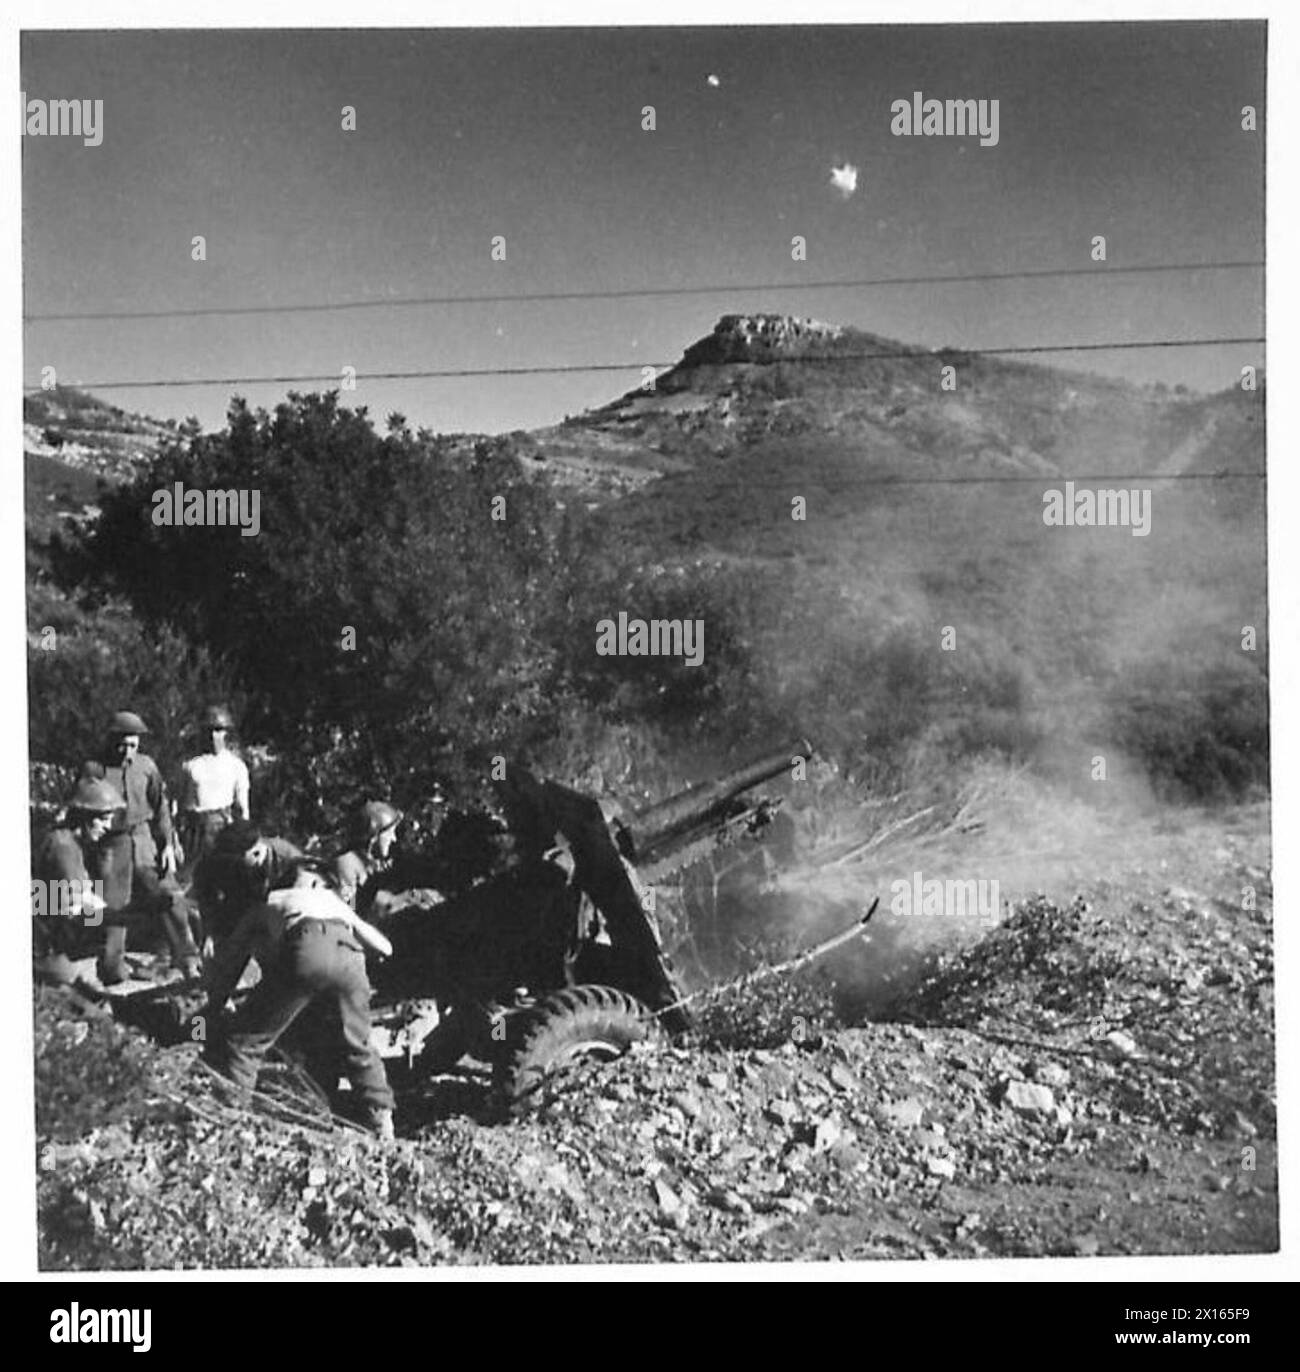 THE BRITISH ARMY IN THE TUNISIA CAMPAIGN, NOVEMBER 1942-MAY 1943 - A 25 pounder artillery gun of the Royal Artillery in action on the Djebel-Bargou front, 31 January 1943. Troops of the 6th Battalion, Queen's Own (Royal West Kent) Regiment (78th Infantry Division) arrived at Siliana (Djebel-Bargou Front) and moved through Robba to relieve a French unit in the line. They started to advance and continued to do so the following day. 'C' Company carried on the advance and maintained contact with the Italians and after a severe pounding by 25 pounder artillery guns the enemy again retreated and on Stock Photo